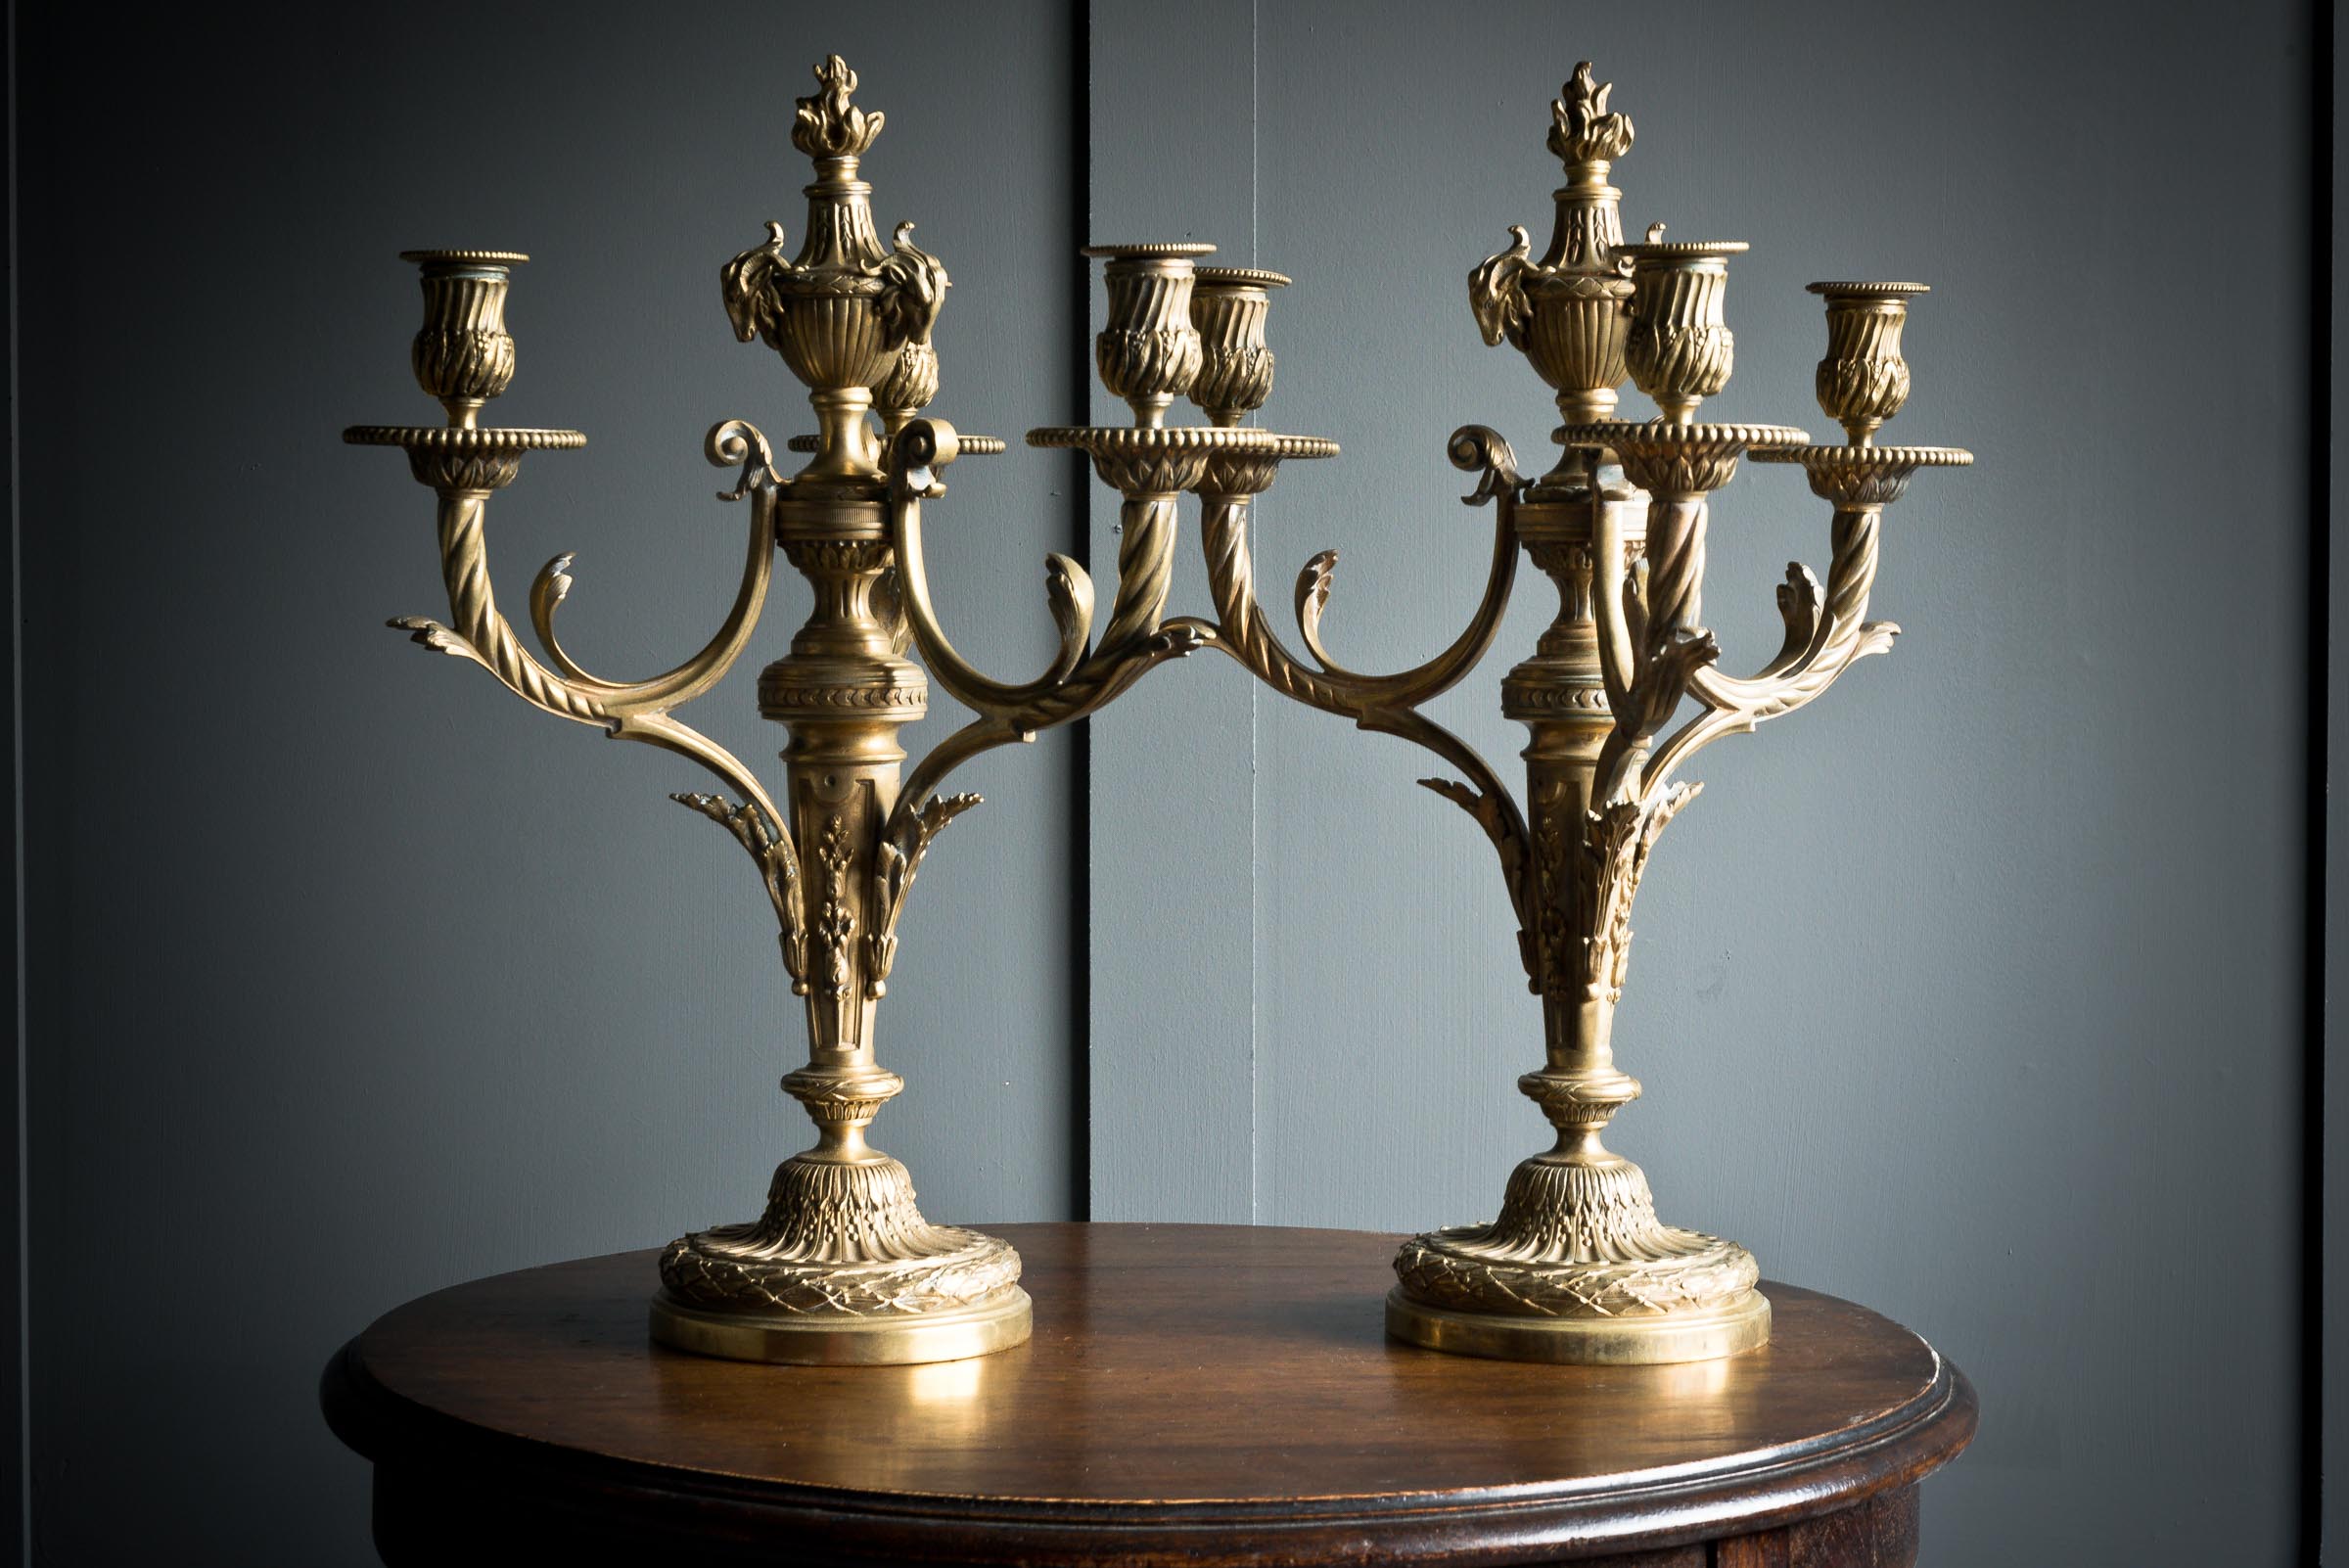 Stunning twin pair of french brass candelabra each consisting of three scrolled arms on a shallow dome base.